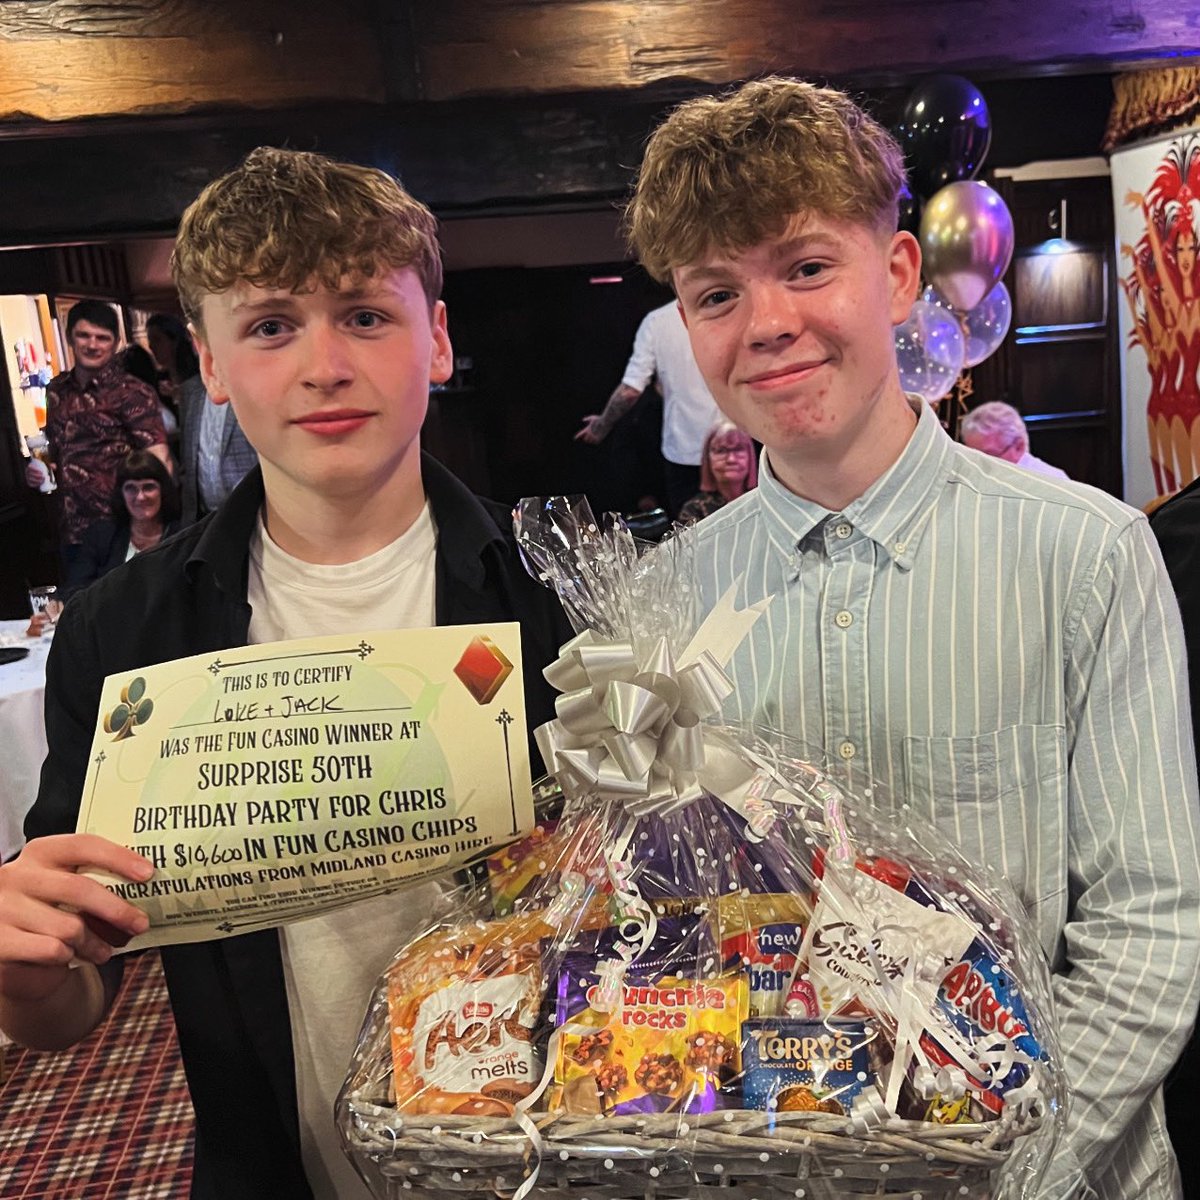 🎉 Luke & Jack won the fun Casino at Chris’s Surprise 50th Birthday! 🎲 With a whopping 10,600 fun casino chips! Huge shoutout to @RedLionHotel1 for hosting such an epic night! #surprise #50thbirthdayparty #birthday #Events #FunCasinos #Atherstone #Warwickshire #Midlands